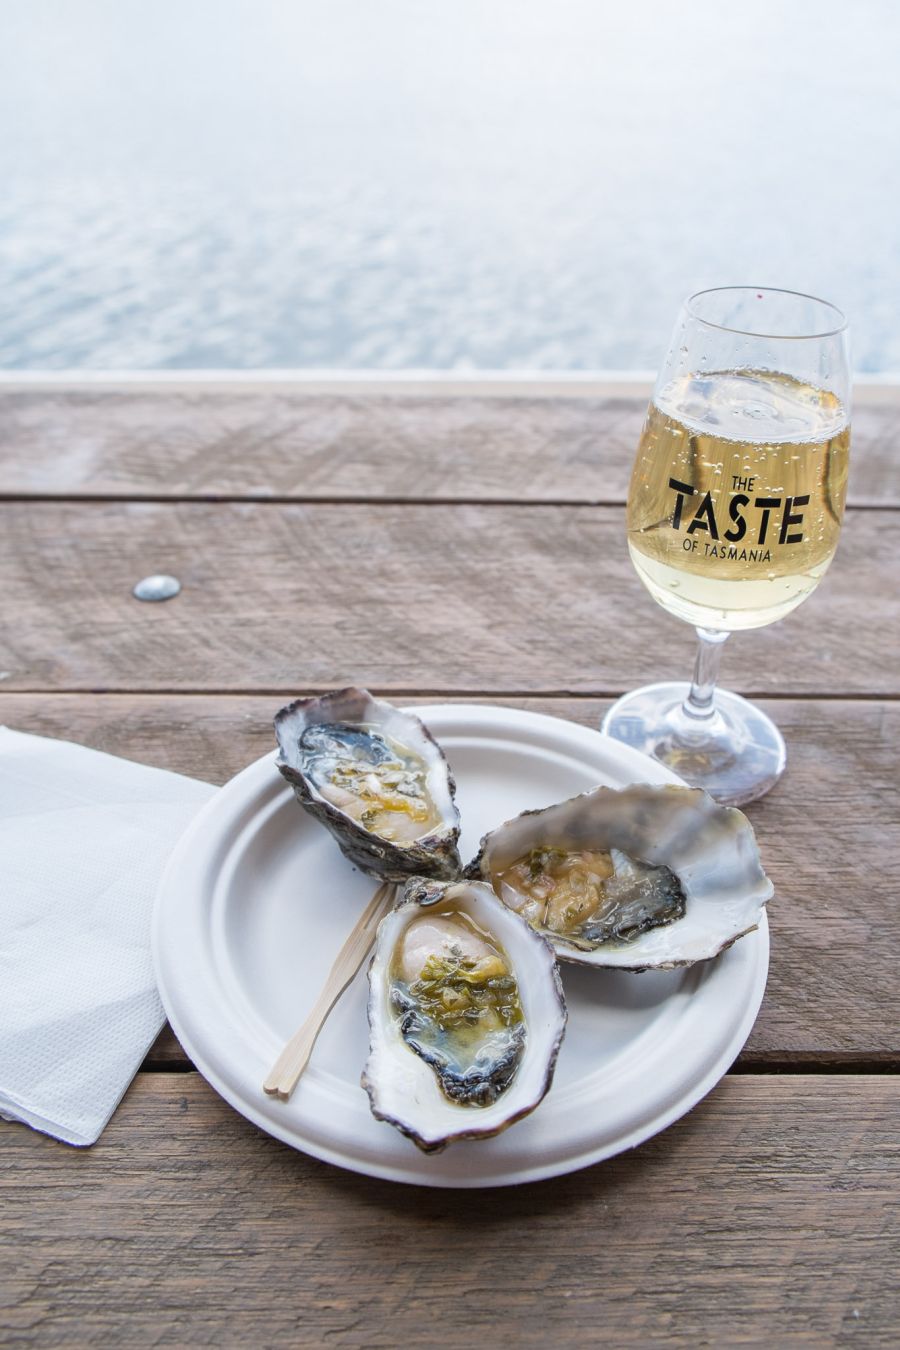 From the Clover Hill Oyster Bar - oysters dressed with Pernod, tarragon and olive oil, with a glass of champagne